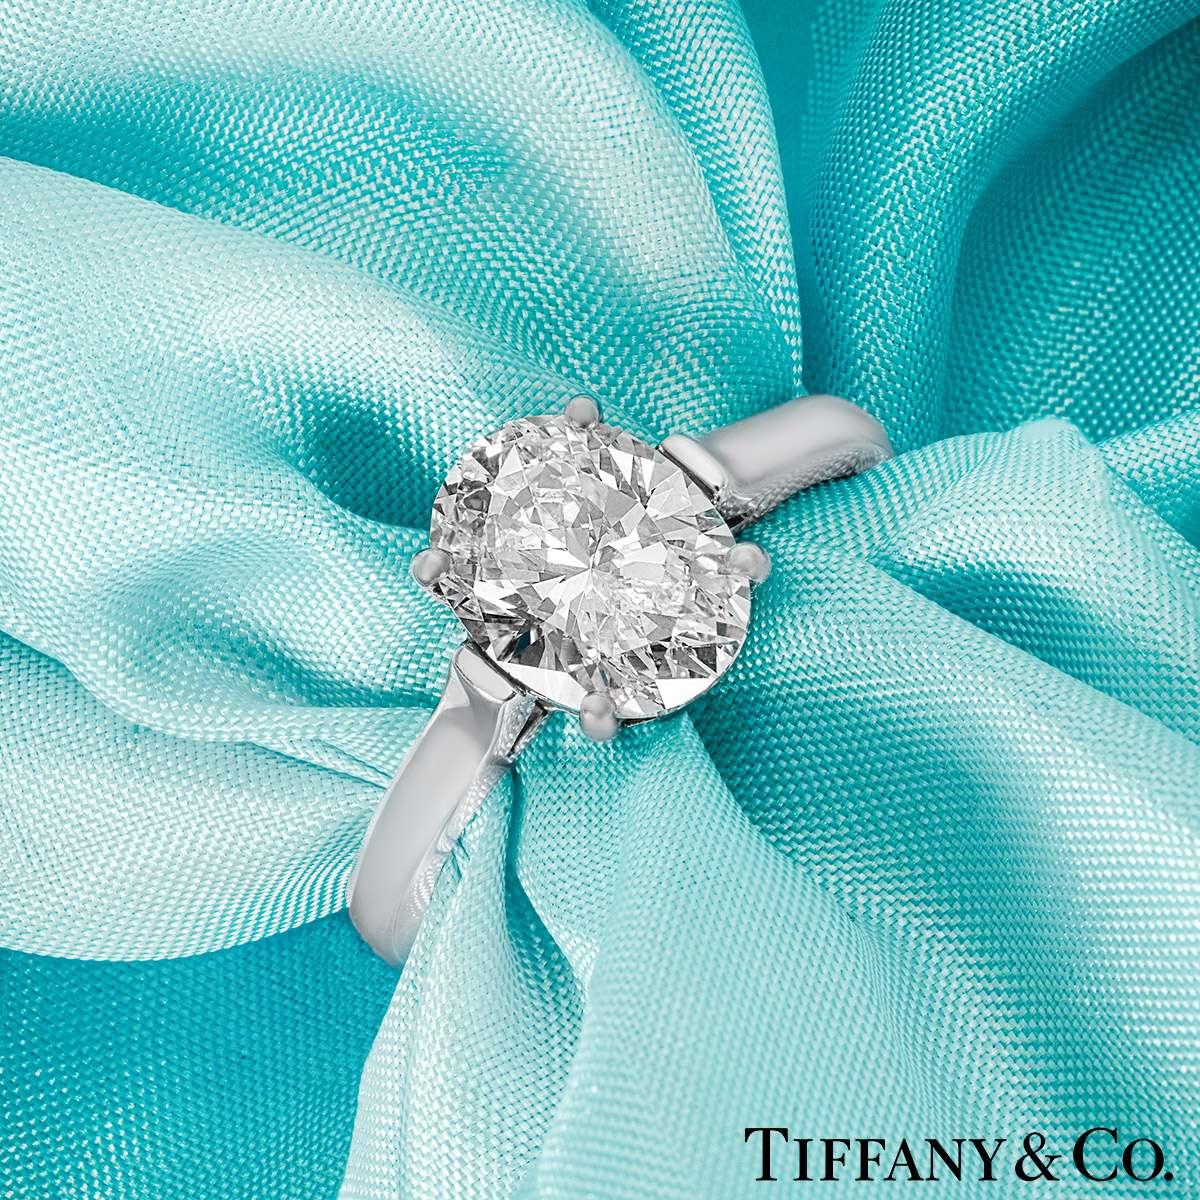 Tiffany & Co. Platinum Oval Diamond Engagement Ring 2.06 Ct D/VVS2 GIA Certified In Excellent Condition For Sale In London, GB